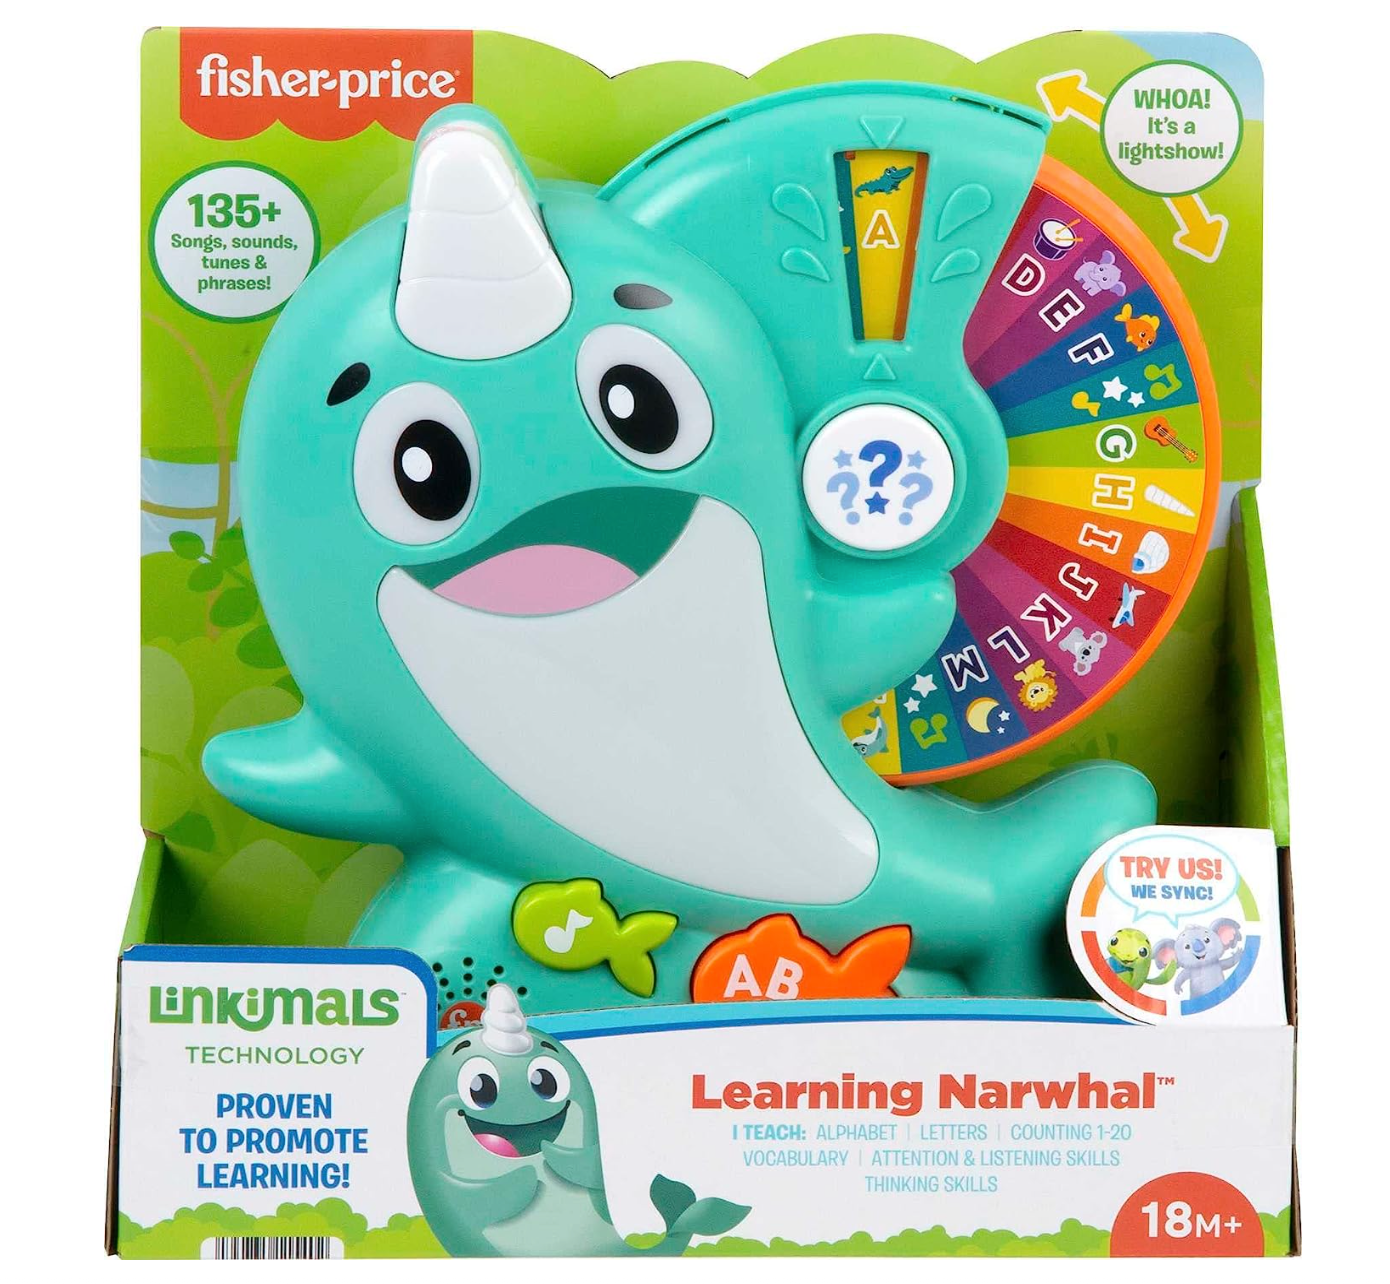 Fisher-Price Linkimals Toddler Toy Learning Narwhal with Interactive Lights Music & Educational Games for Ages 18+ Months